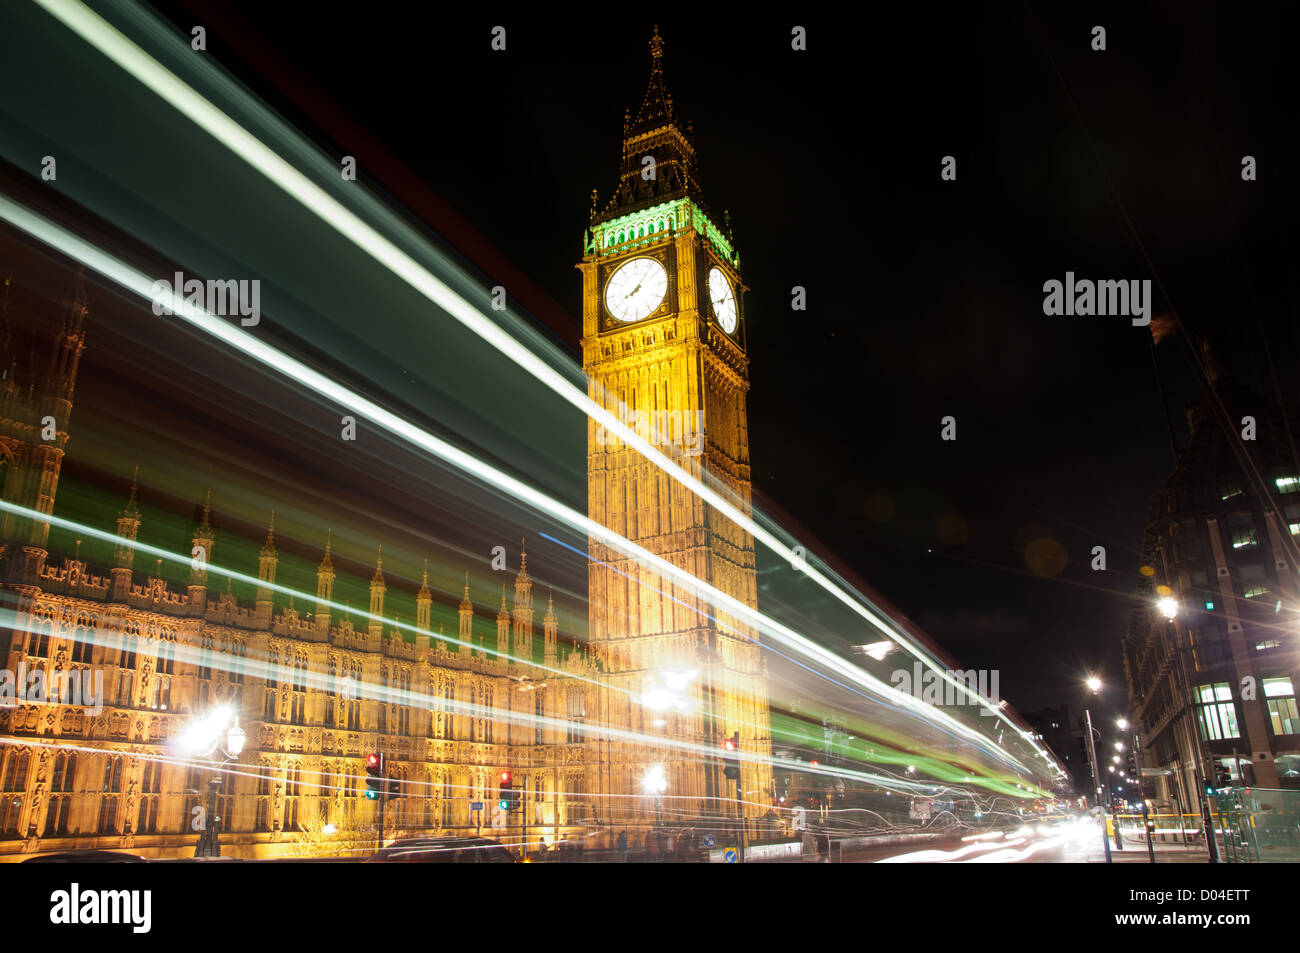 Night, slow exposure photography of Westminster Palace and Big Ben. Image has light streaks from buses in motion Stock Photo